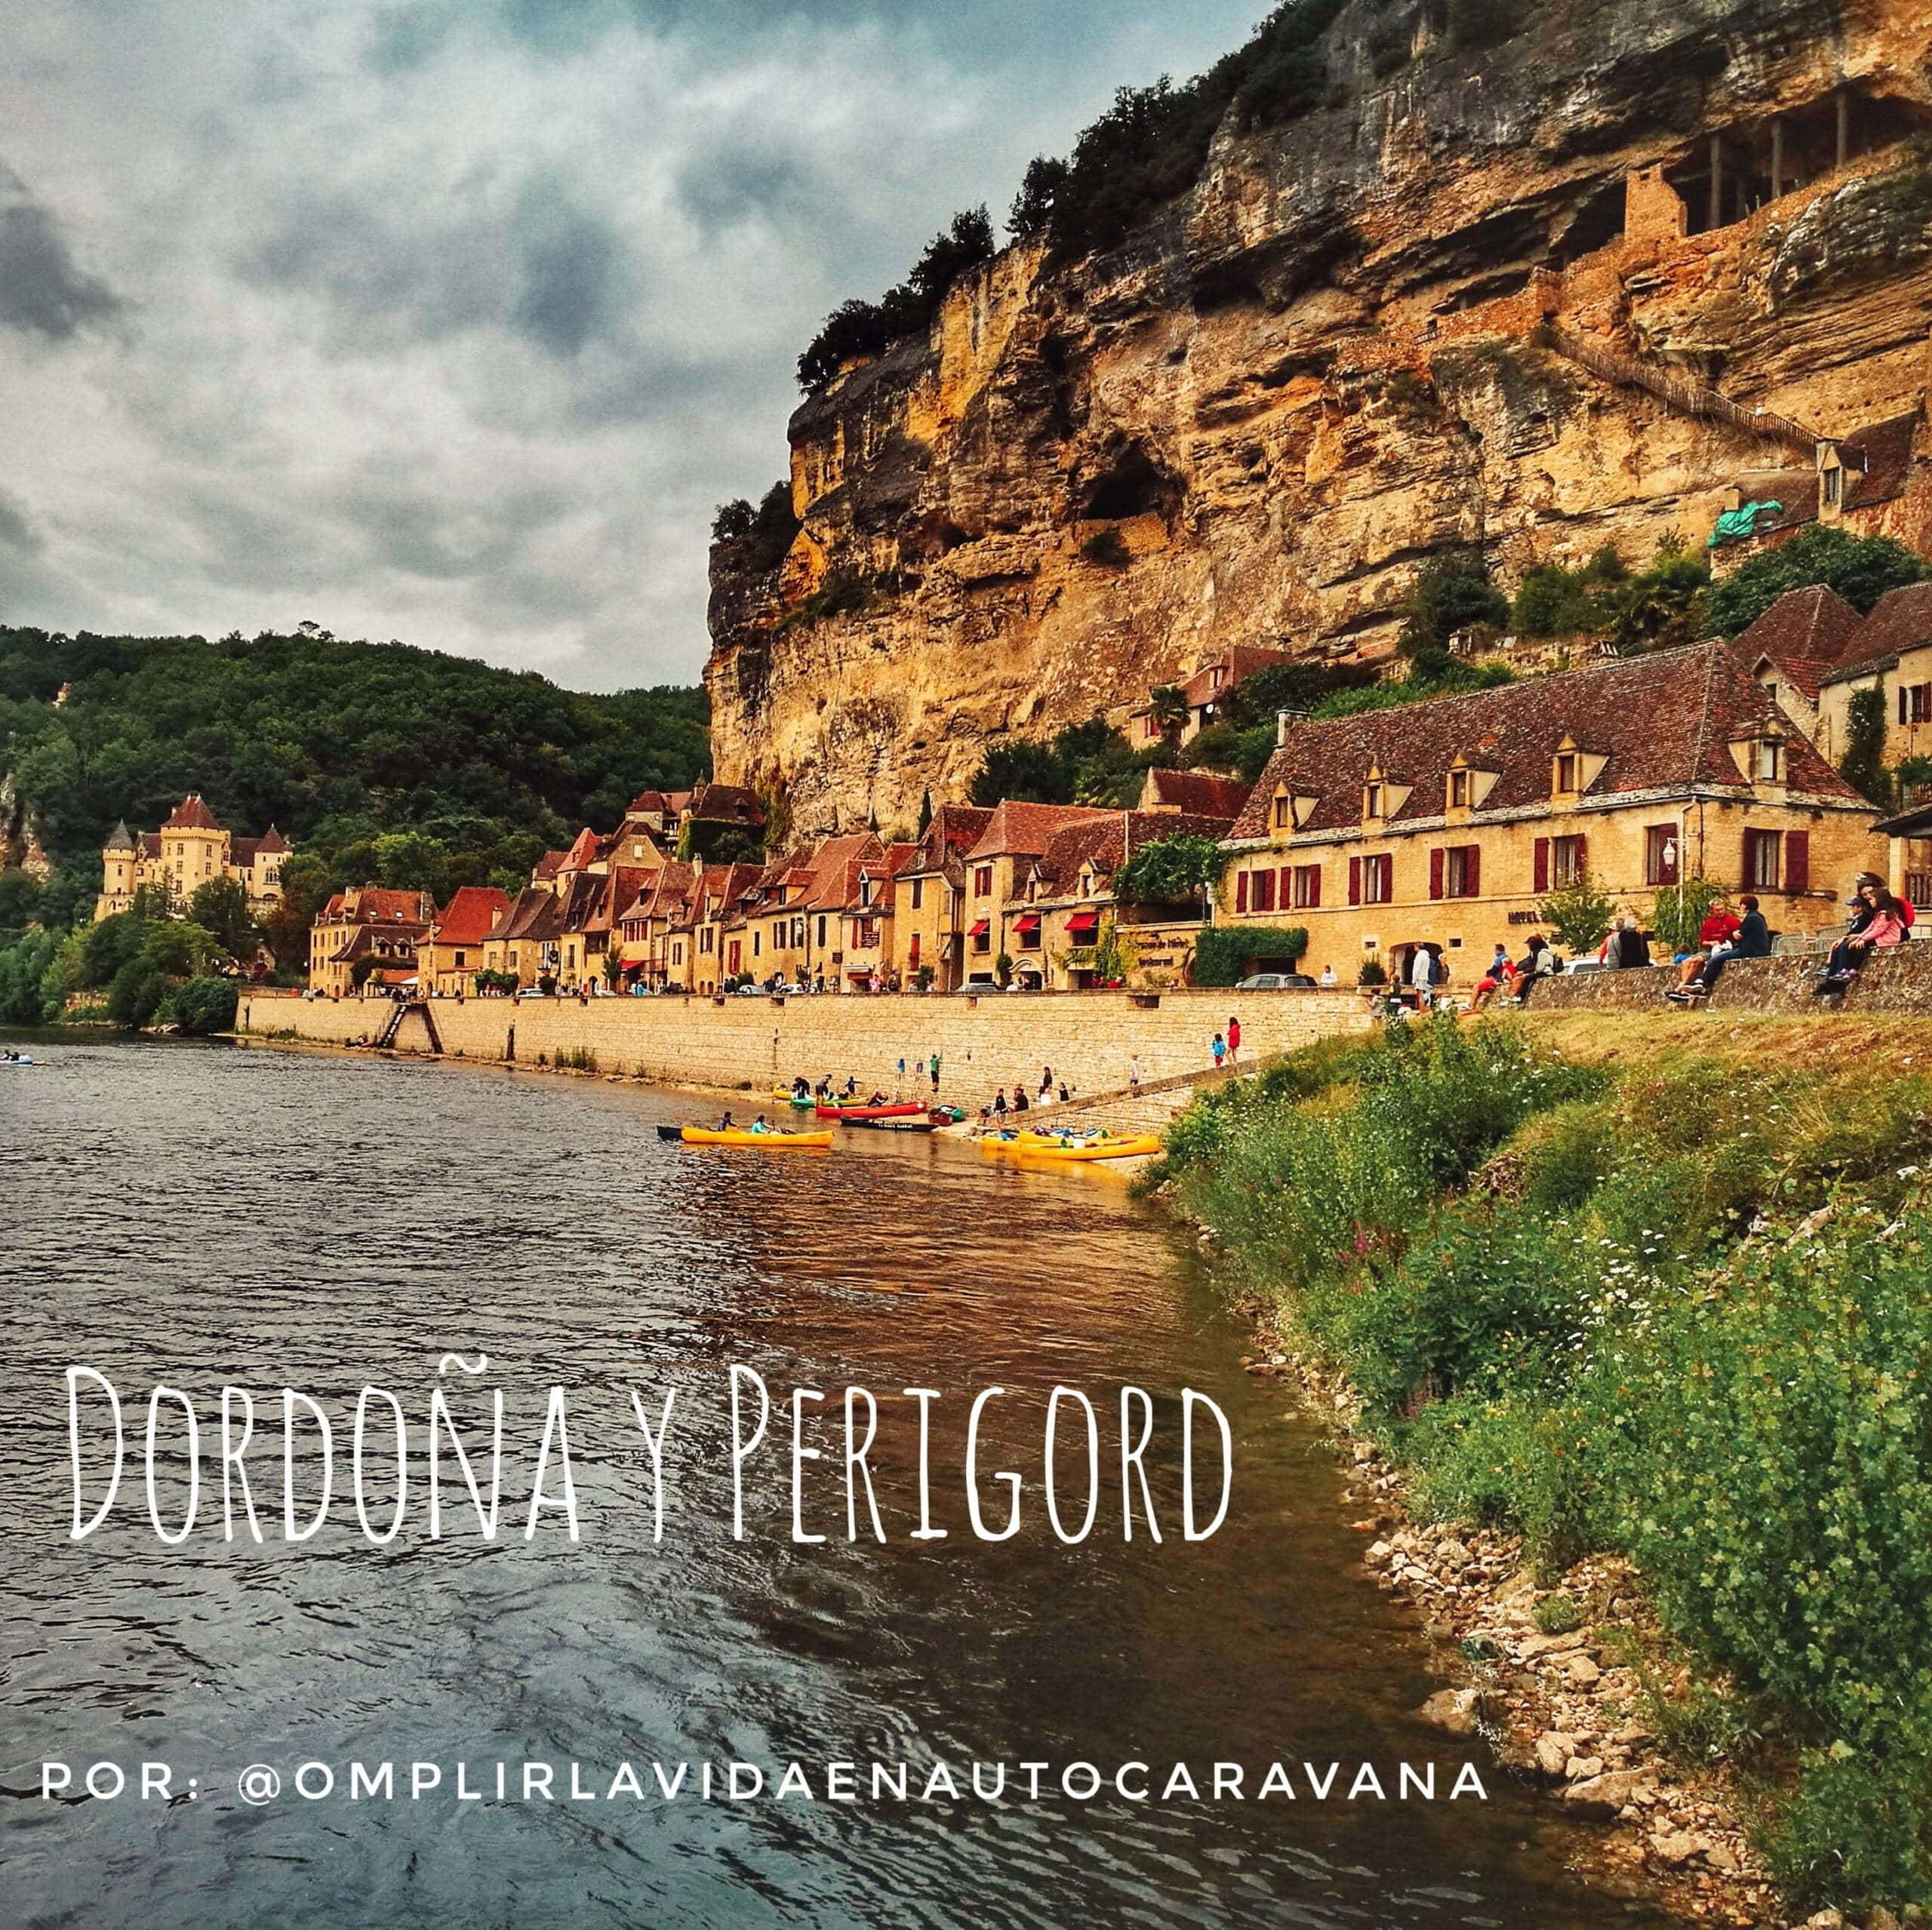 At this moment you are seeing Route through 8 essential plans of the French Dordogne and the Perigord by motorhome by @omplintlavidaenautocaravana